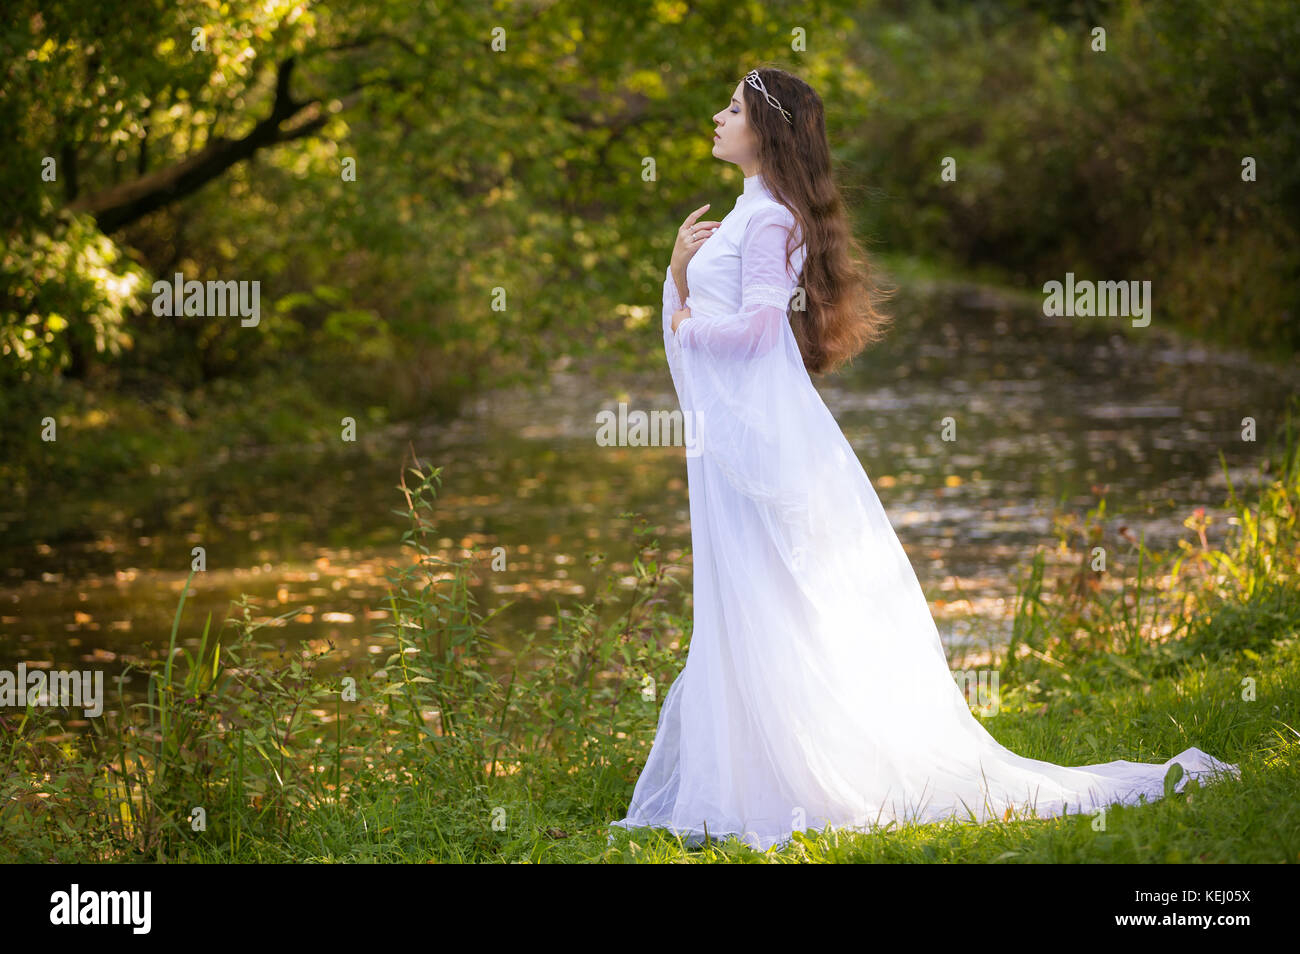 Princess with long hair in white long dress Stock Photo